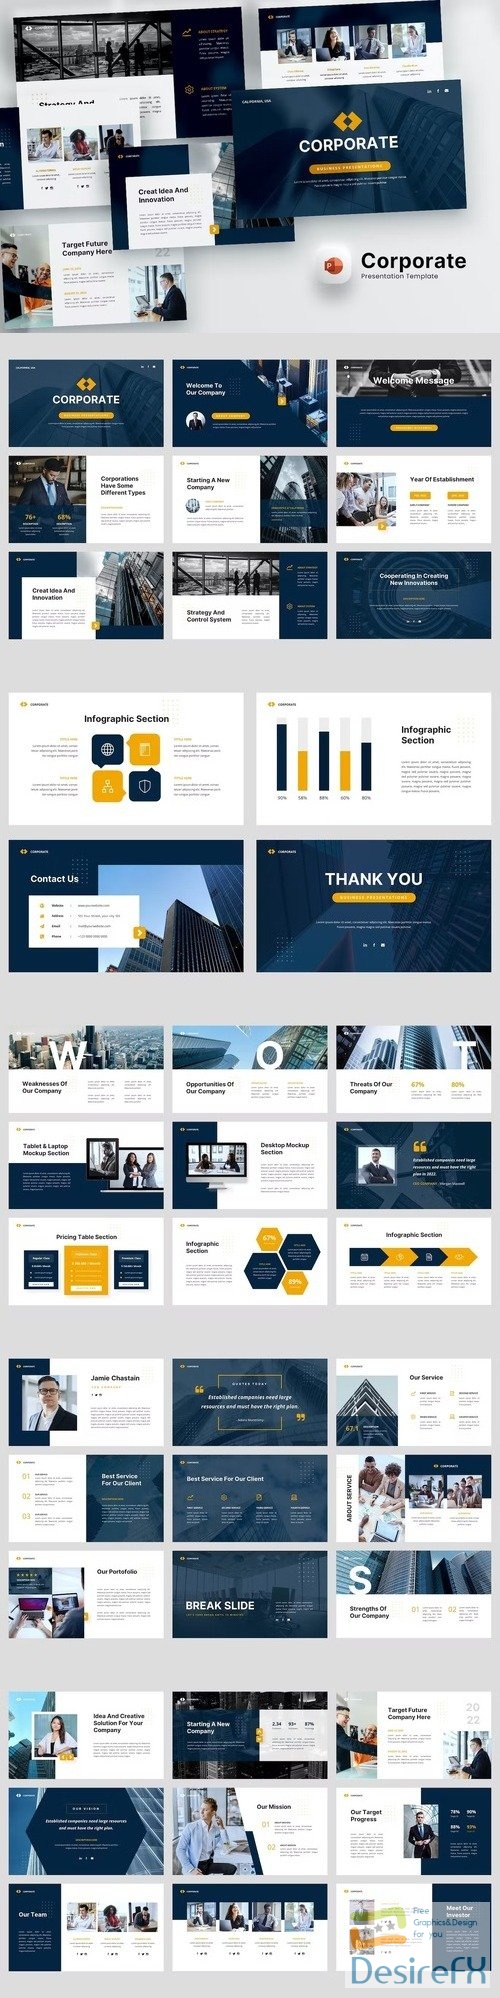 Corporate - Company Profile Powerpoint Template